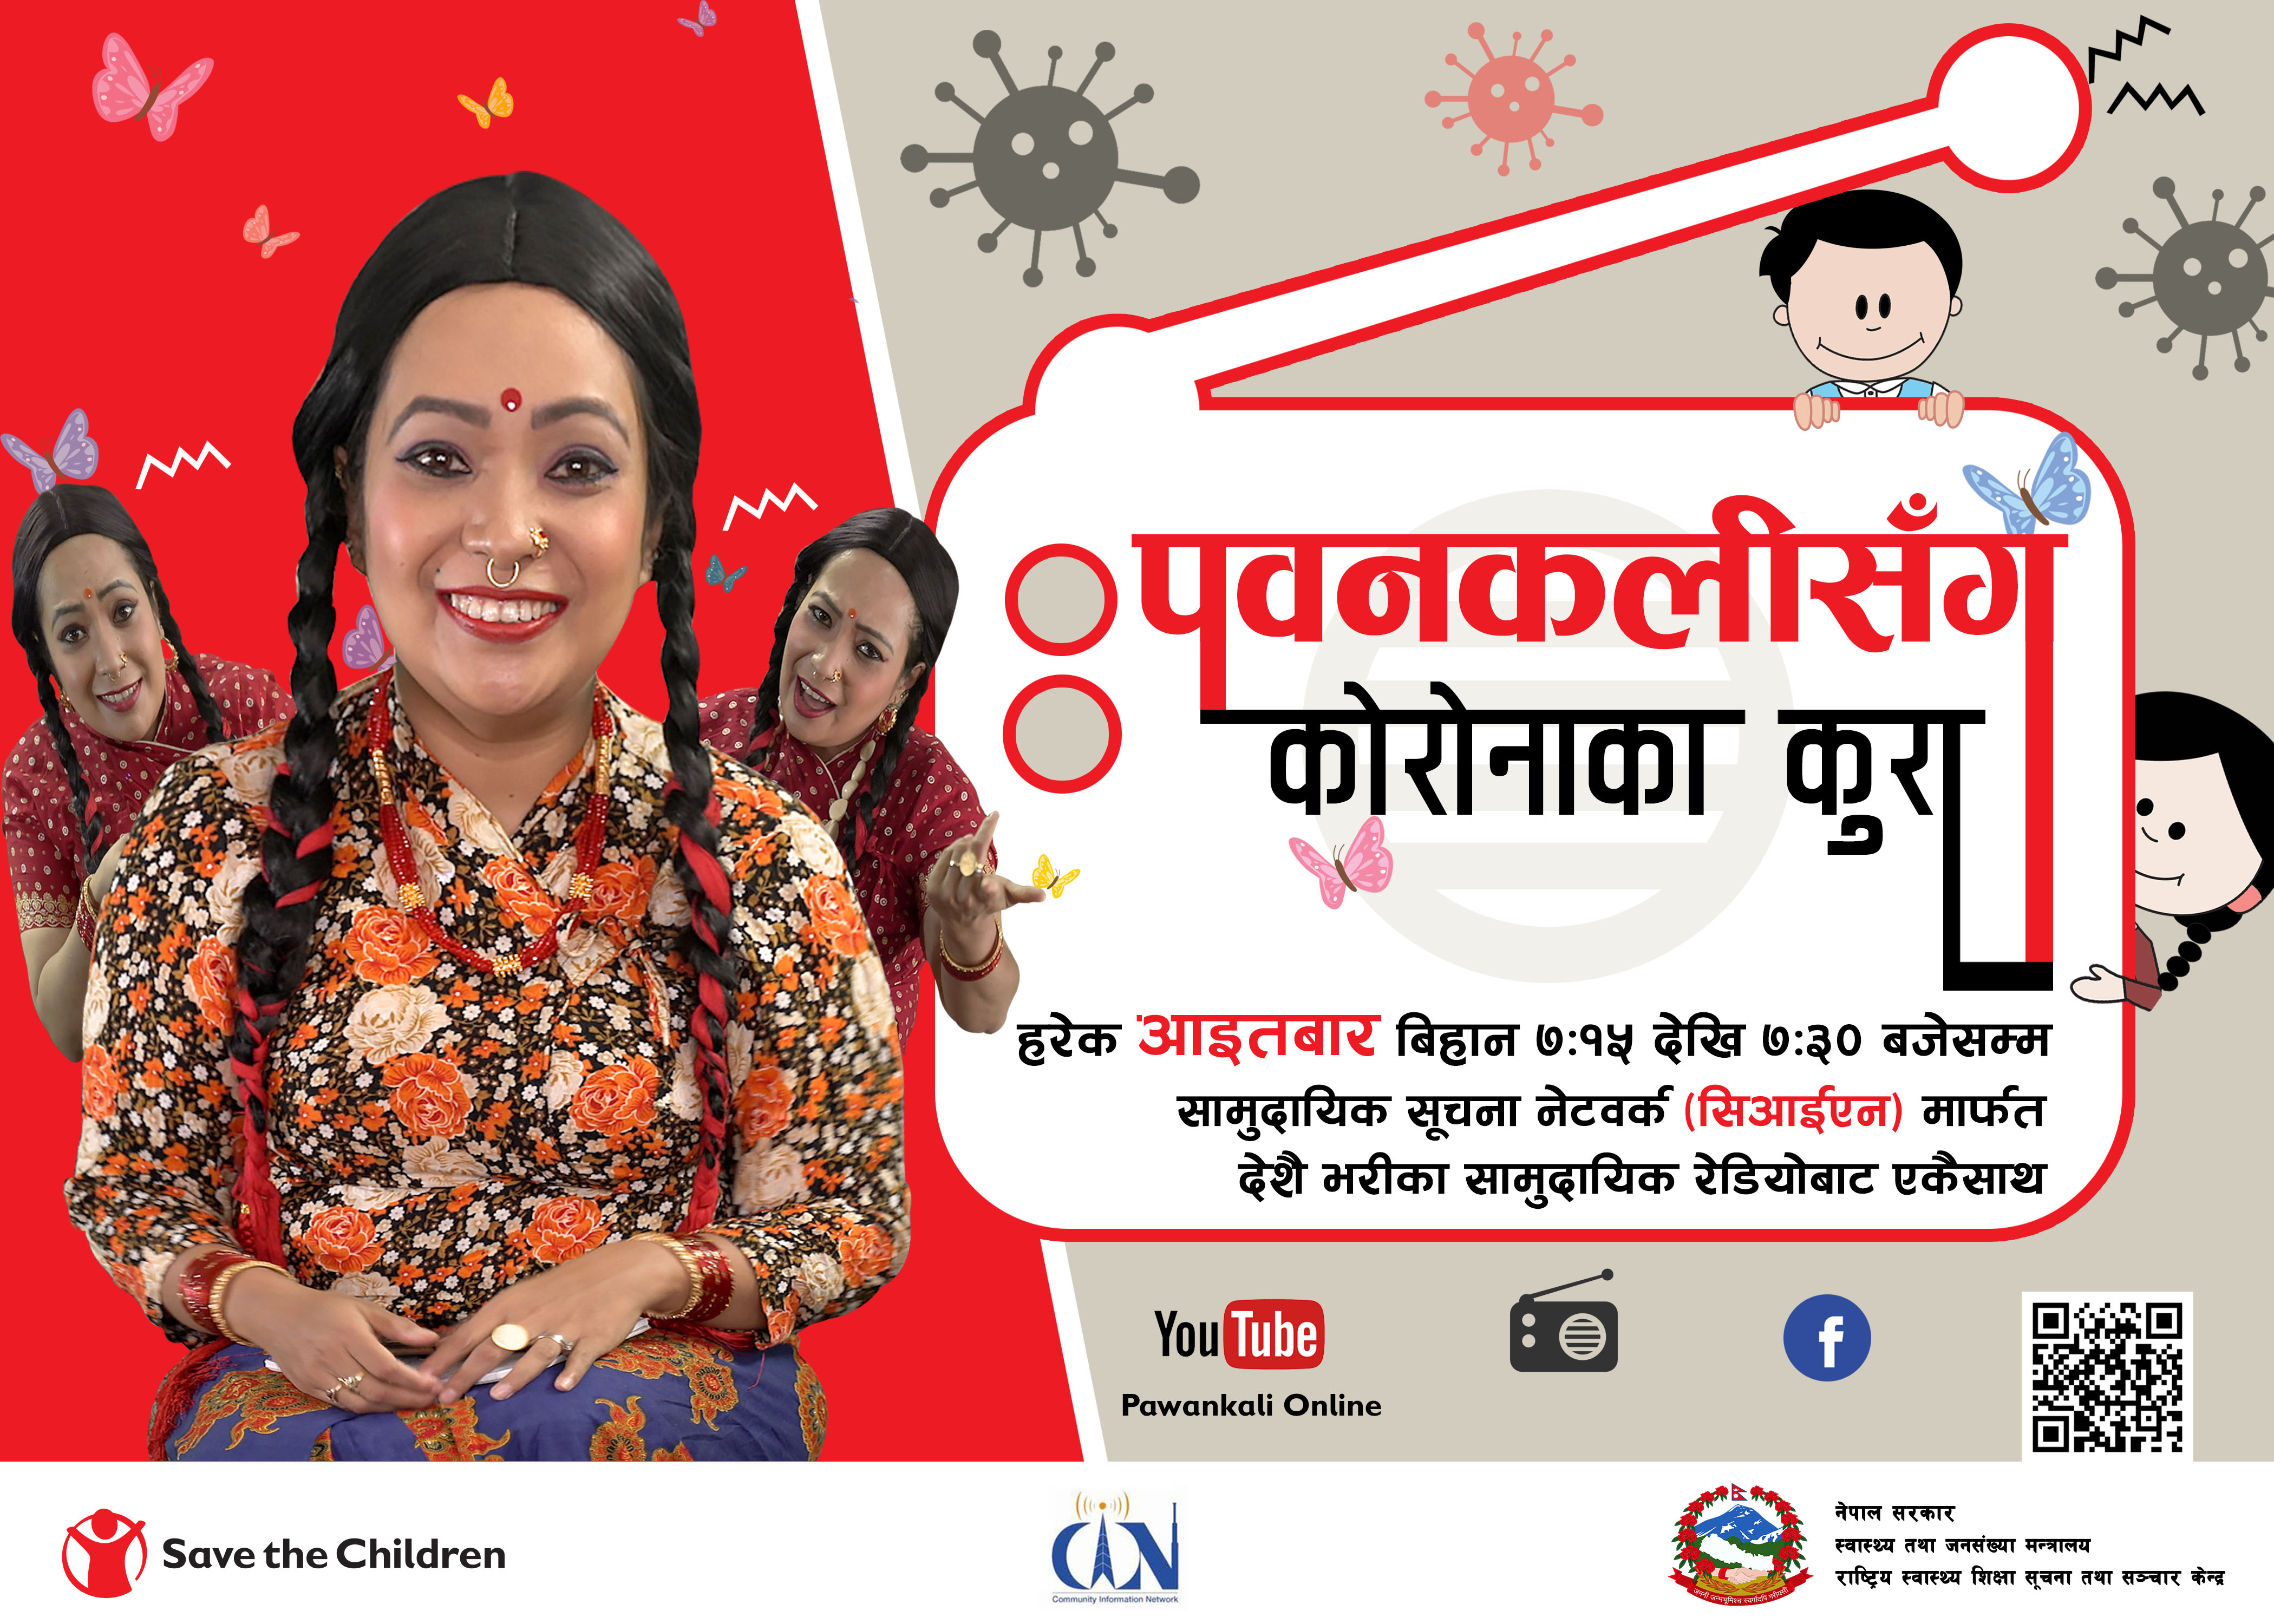 Popular comedy show ‘Pawankali’ to communicate with children about COVID-19